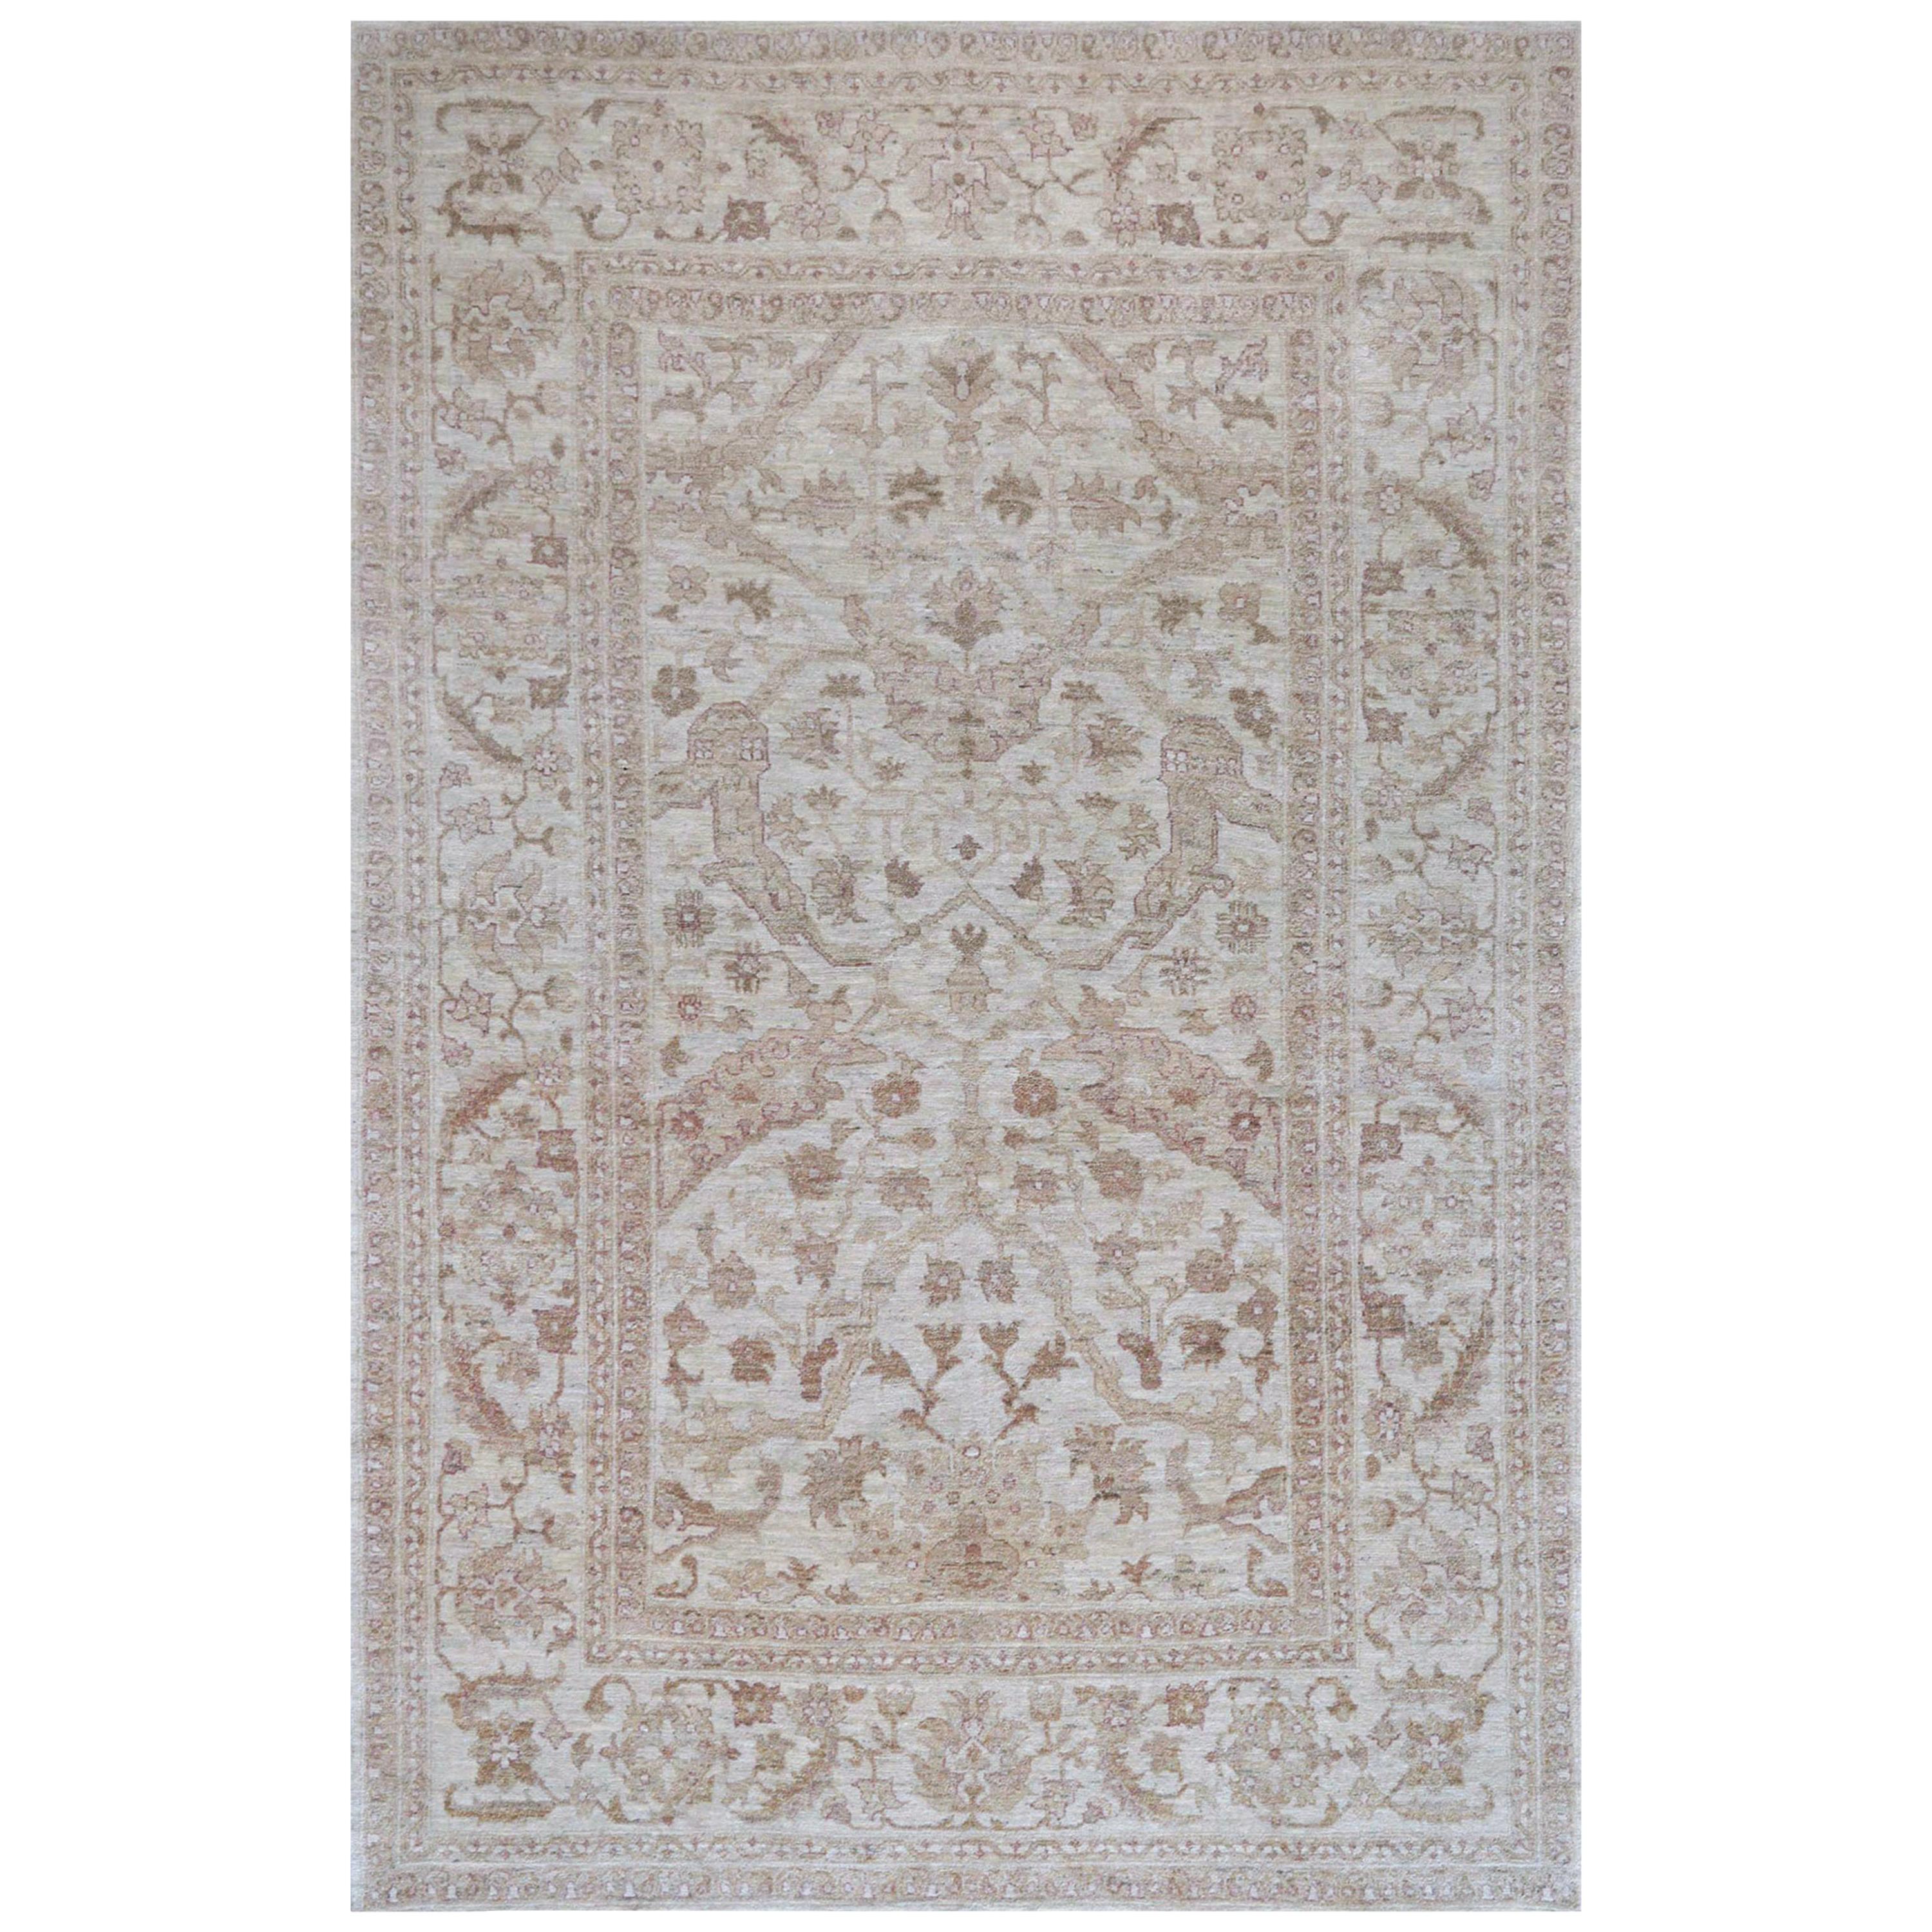 Quality Hand-Knotted Wool Revival Agra Rug For Sale